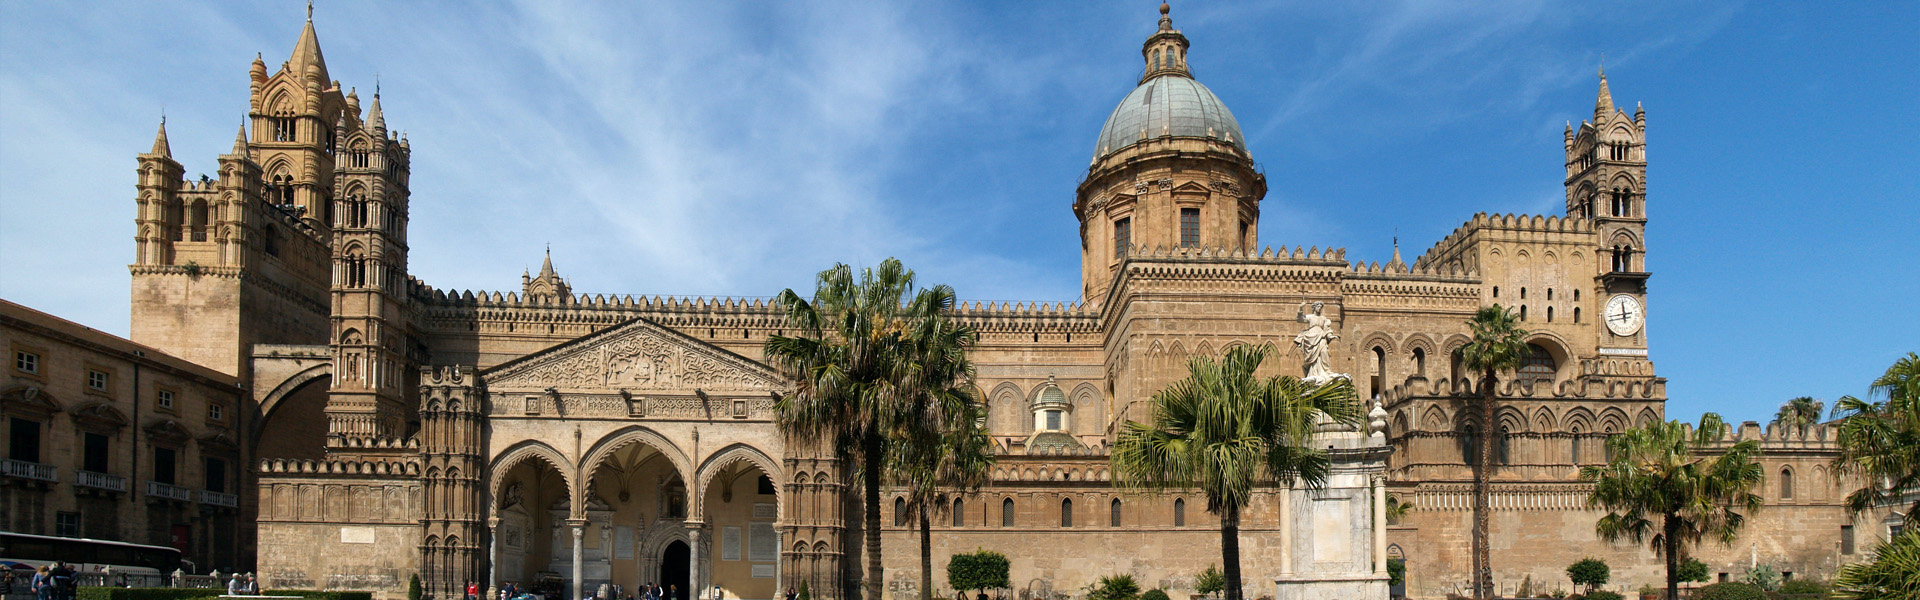 Palermo Arabic and Norman cathedrals of Monreale and Cefalu